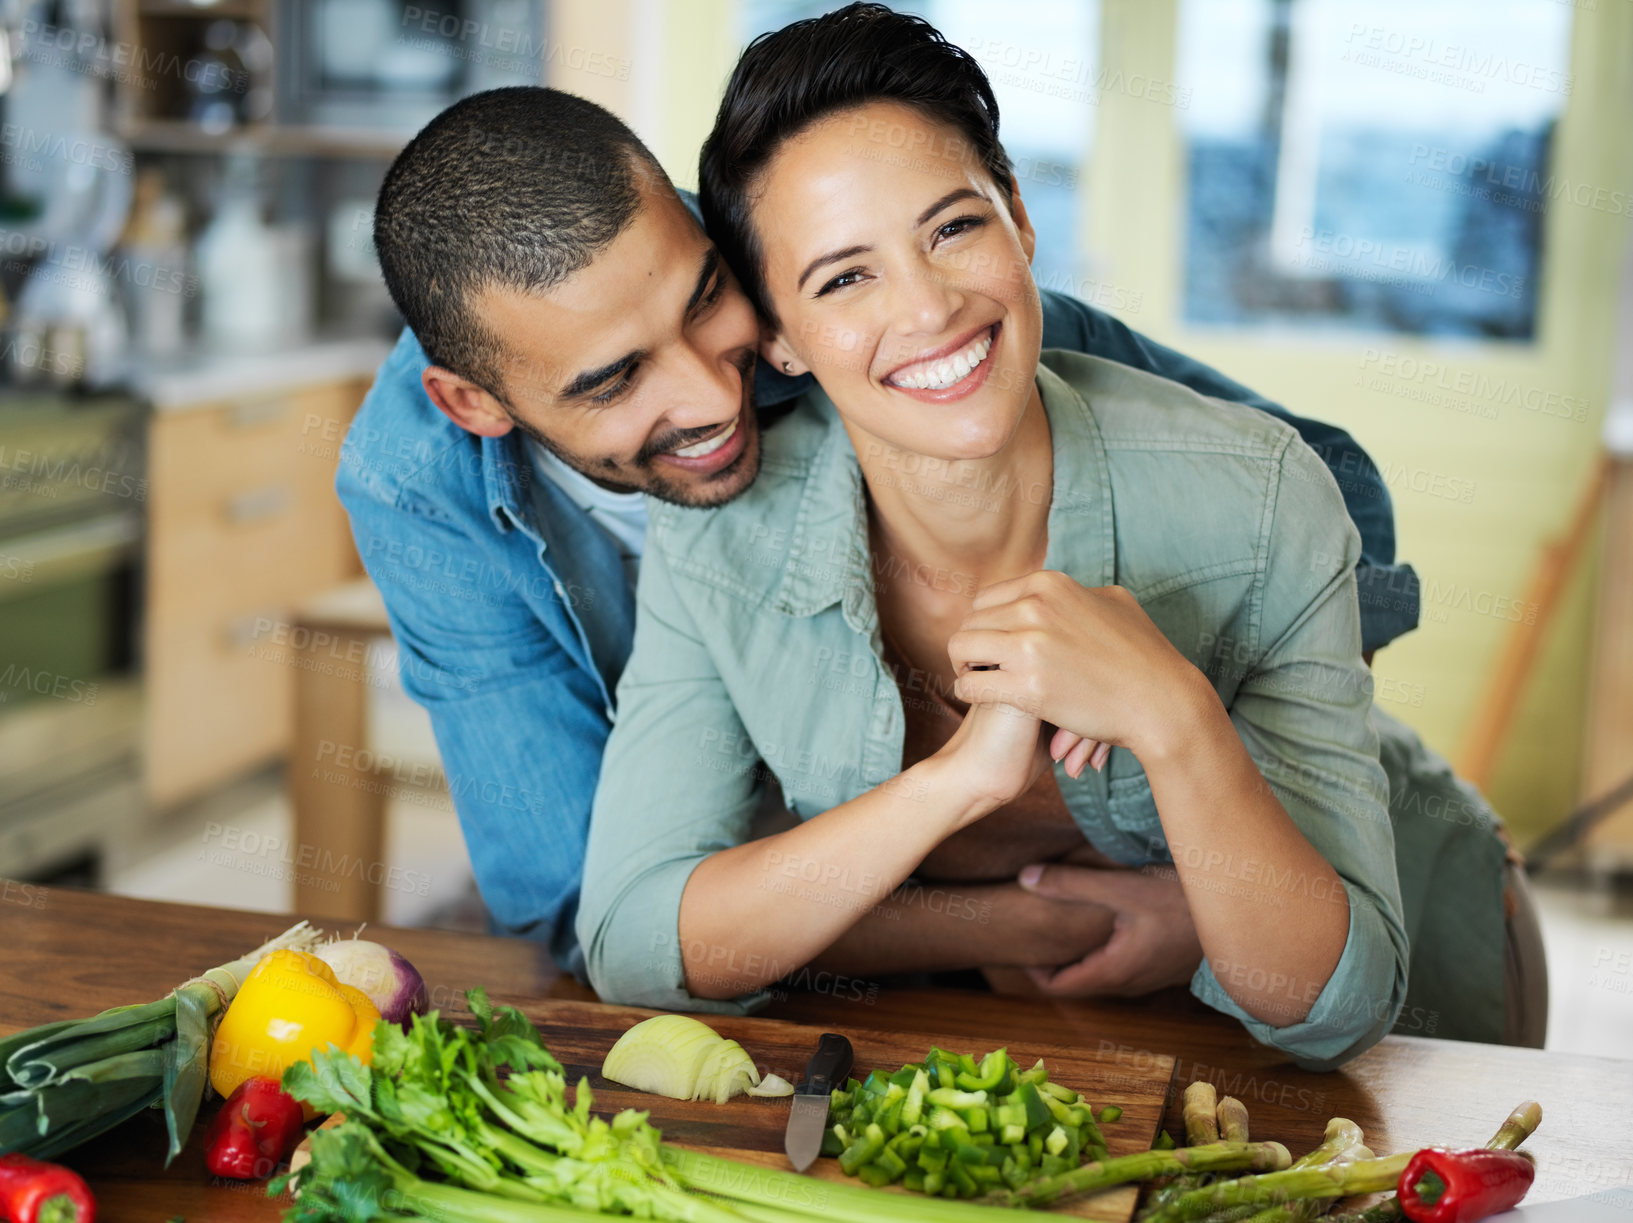 Buy stock photo Cooking, vegan and couple hug at kitchen counter for love, healthy food and bonding together on date. Vegetables, happy man and woman with smile for cutting, nutrition meal or preparation in home